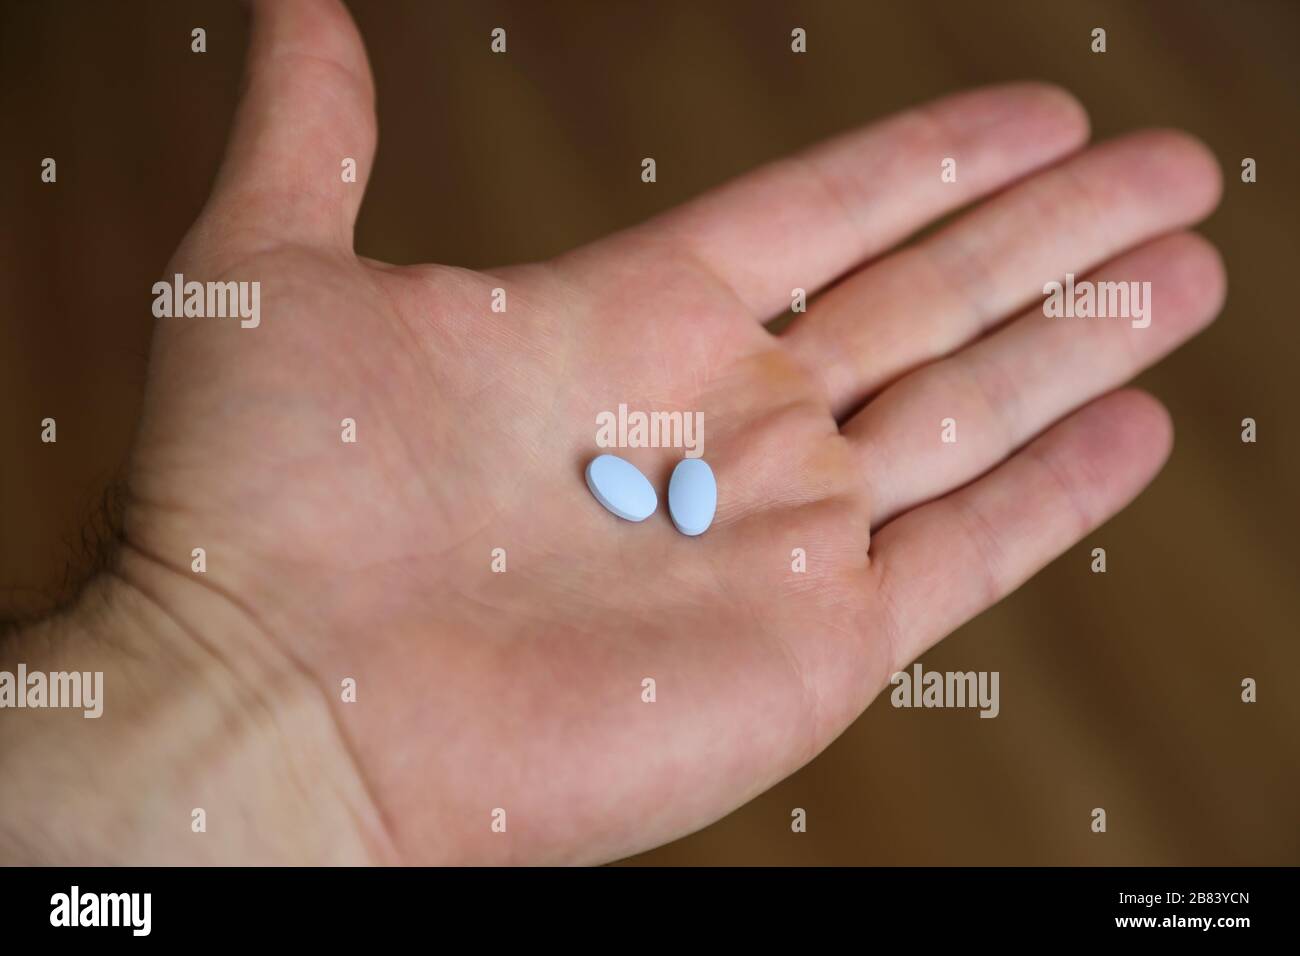 Two generic naproxen sodium pills, used as a nonsteroidal anti-inflammatory painkiller drug (NSAID), are shown held in a hand. Stock Photo